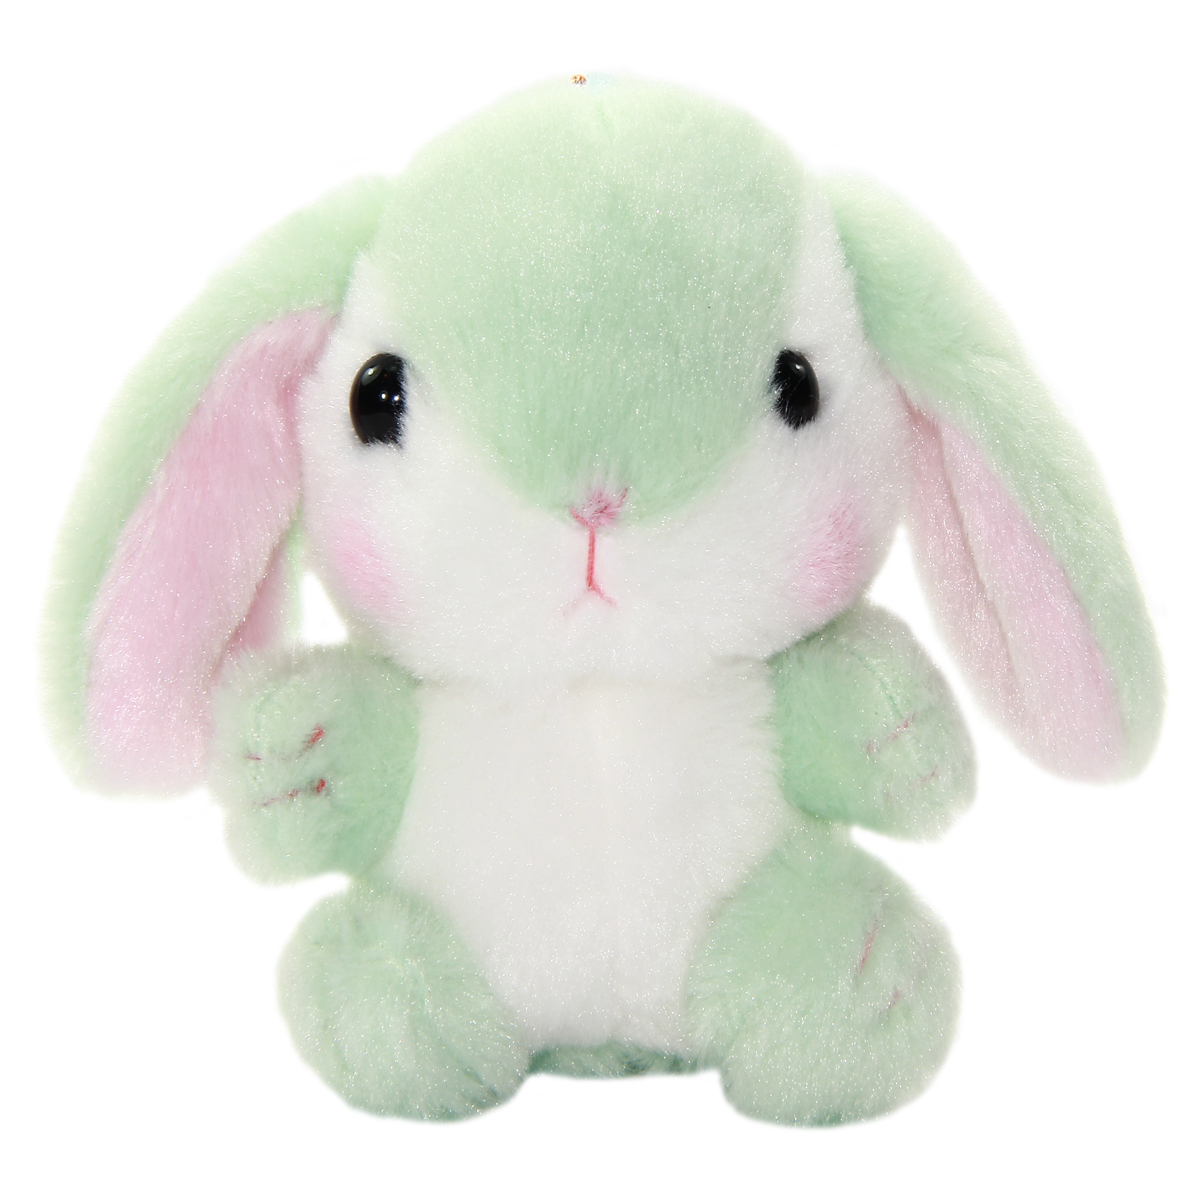 Amuse Gathering Bunny Plushie Collection Cute Stuffed Animal Toy White / Green 4 Inches